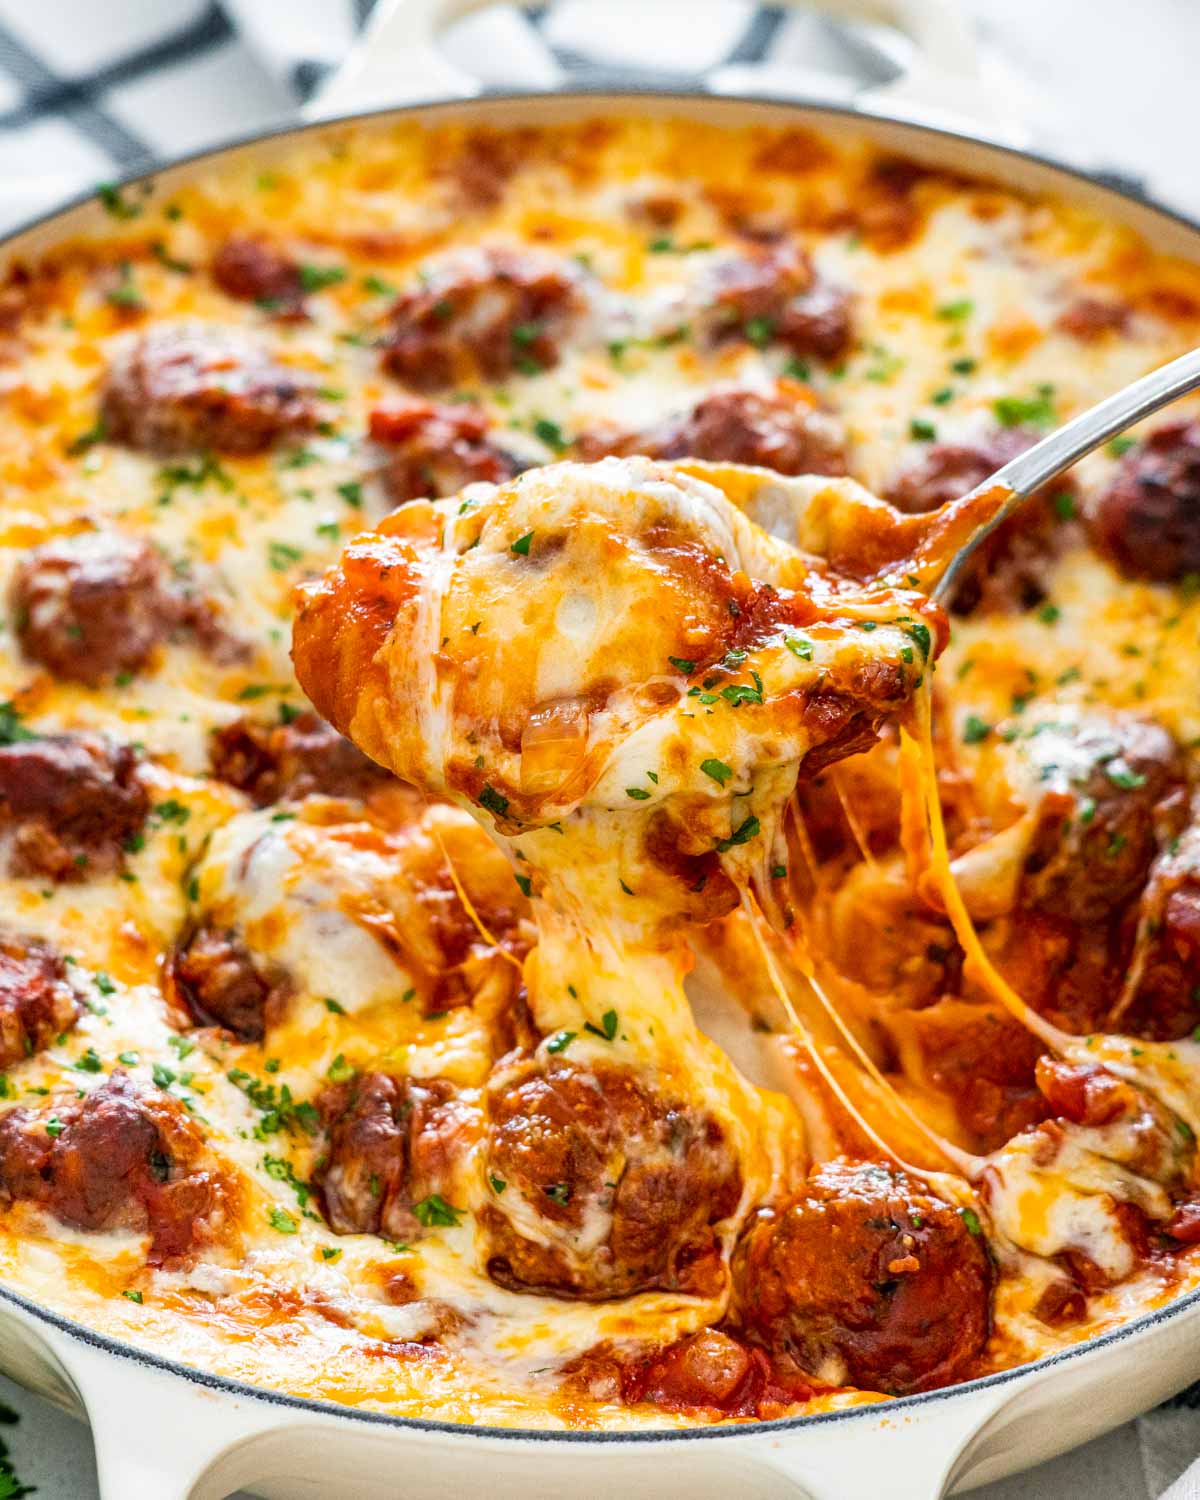 a serving spoon lifting up some meatball mashed potato casserole from a braiser.